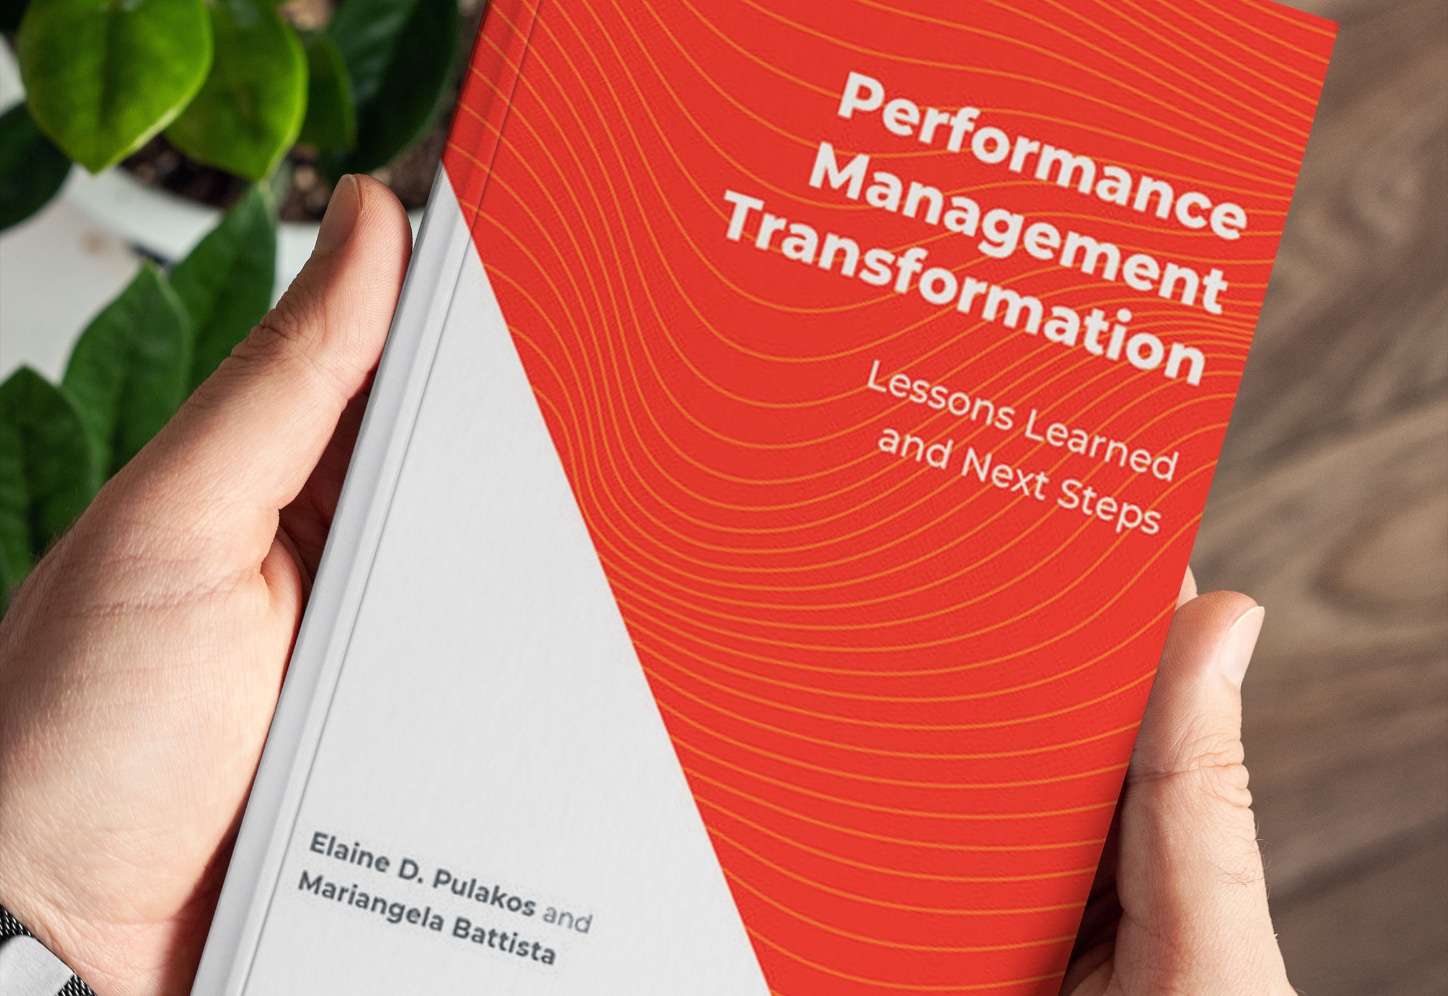 Performance Management Transformation – Lessons Learned and Next Steps